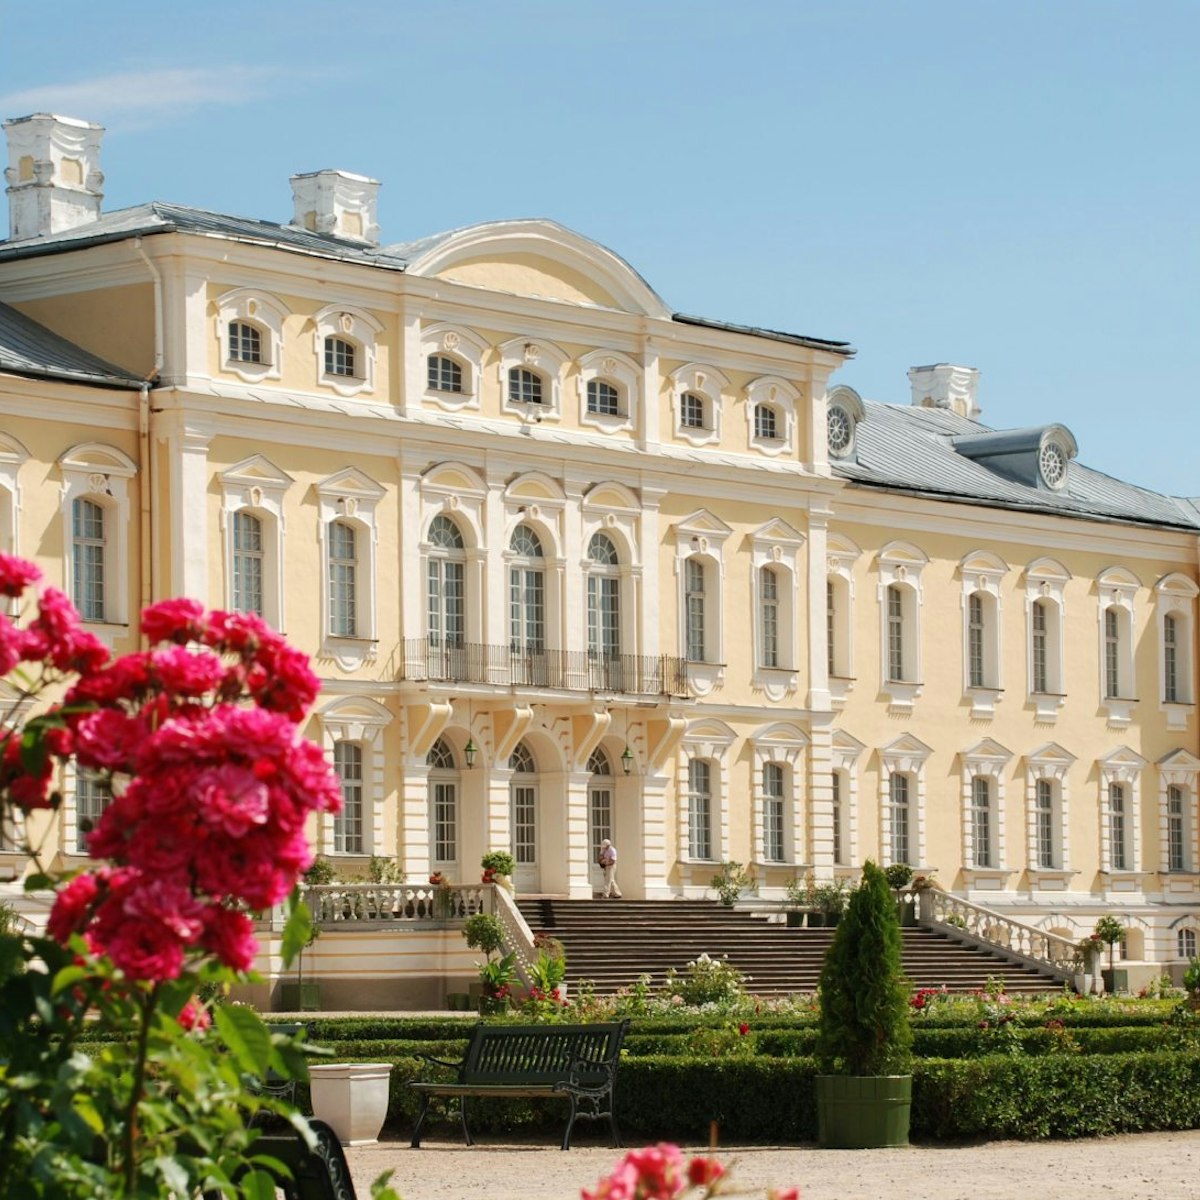 Rundale Palace is one of the most outstanding monuments of Baroque and Rococo art in Latvia. www.rundale.net

Beautiful roses and Baroque - Rococo style palace in background - stock photo
